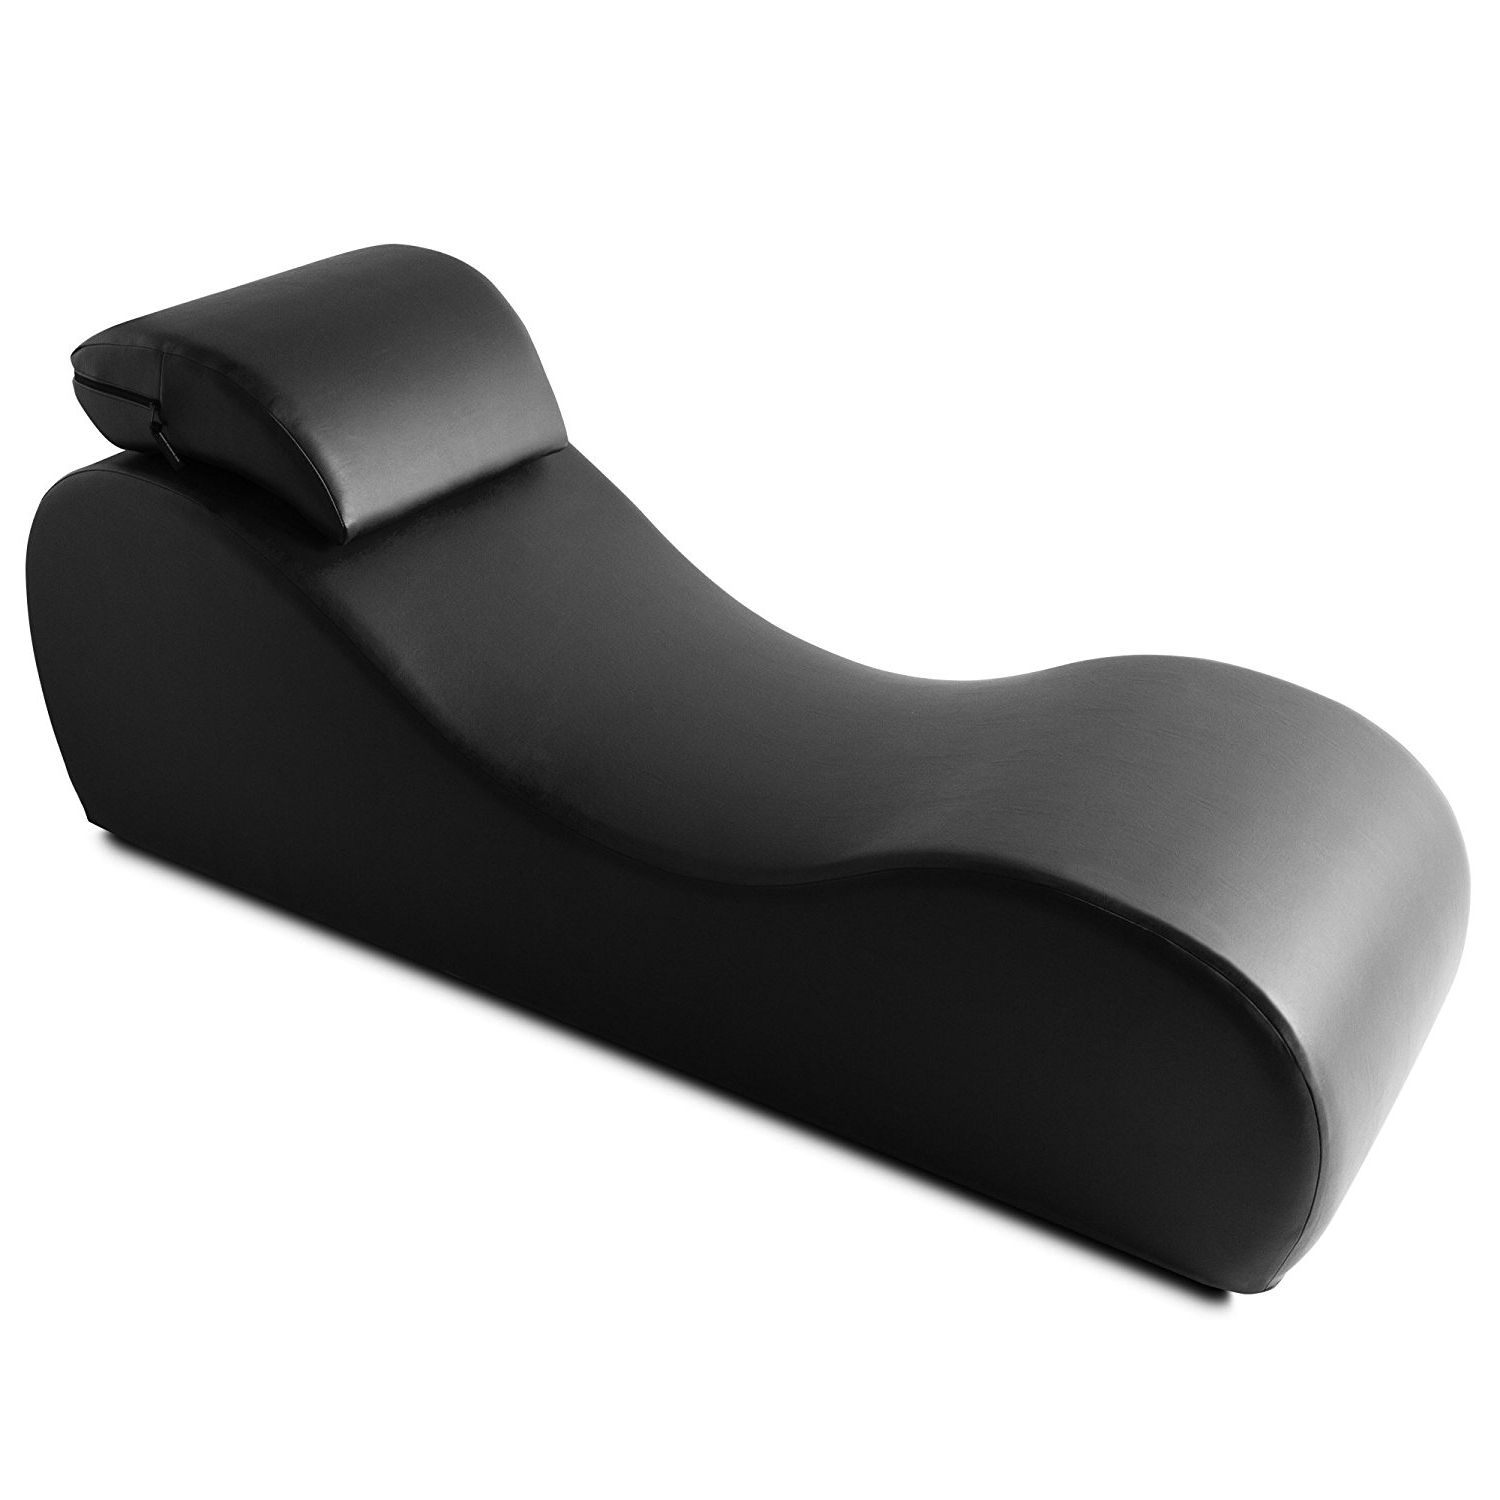 Esse Chaises In Recent Amazon: Liberator Esse Chaise, Black Faux Leather: Health (Photo 3 of 37)